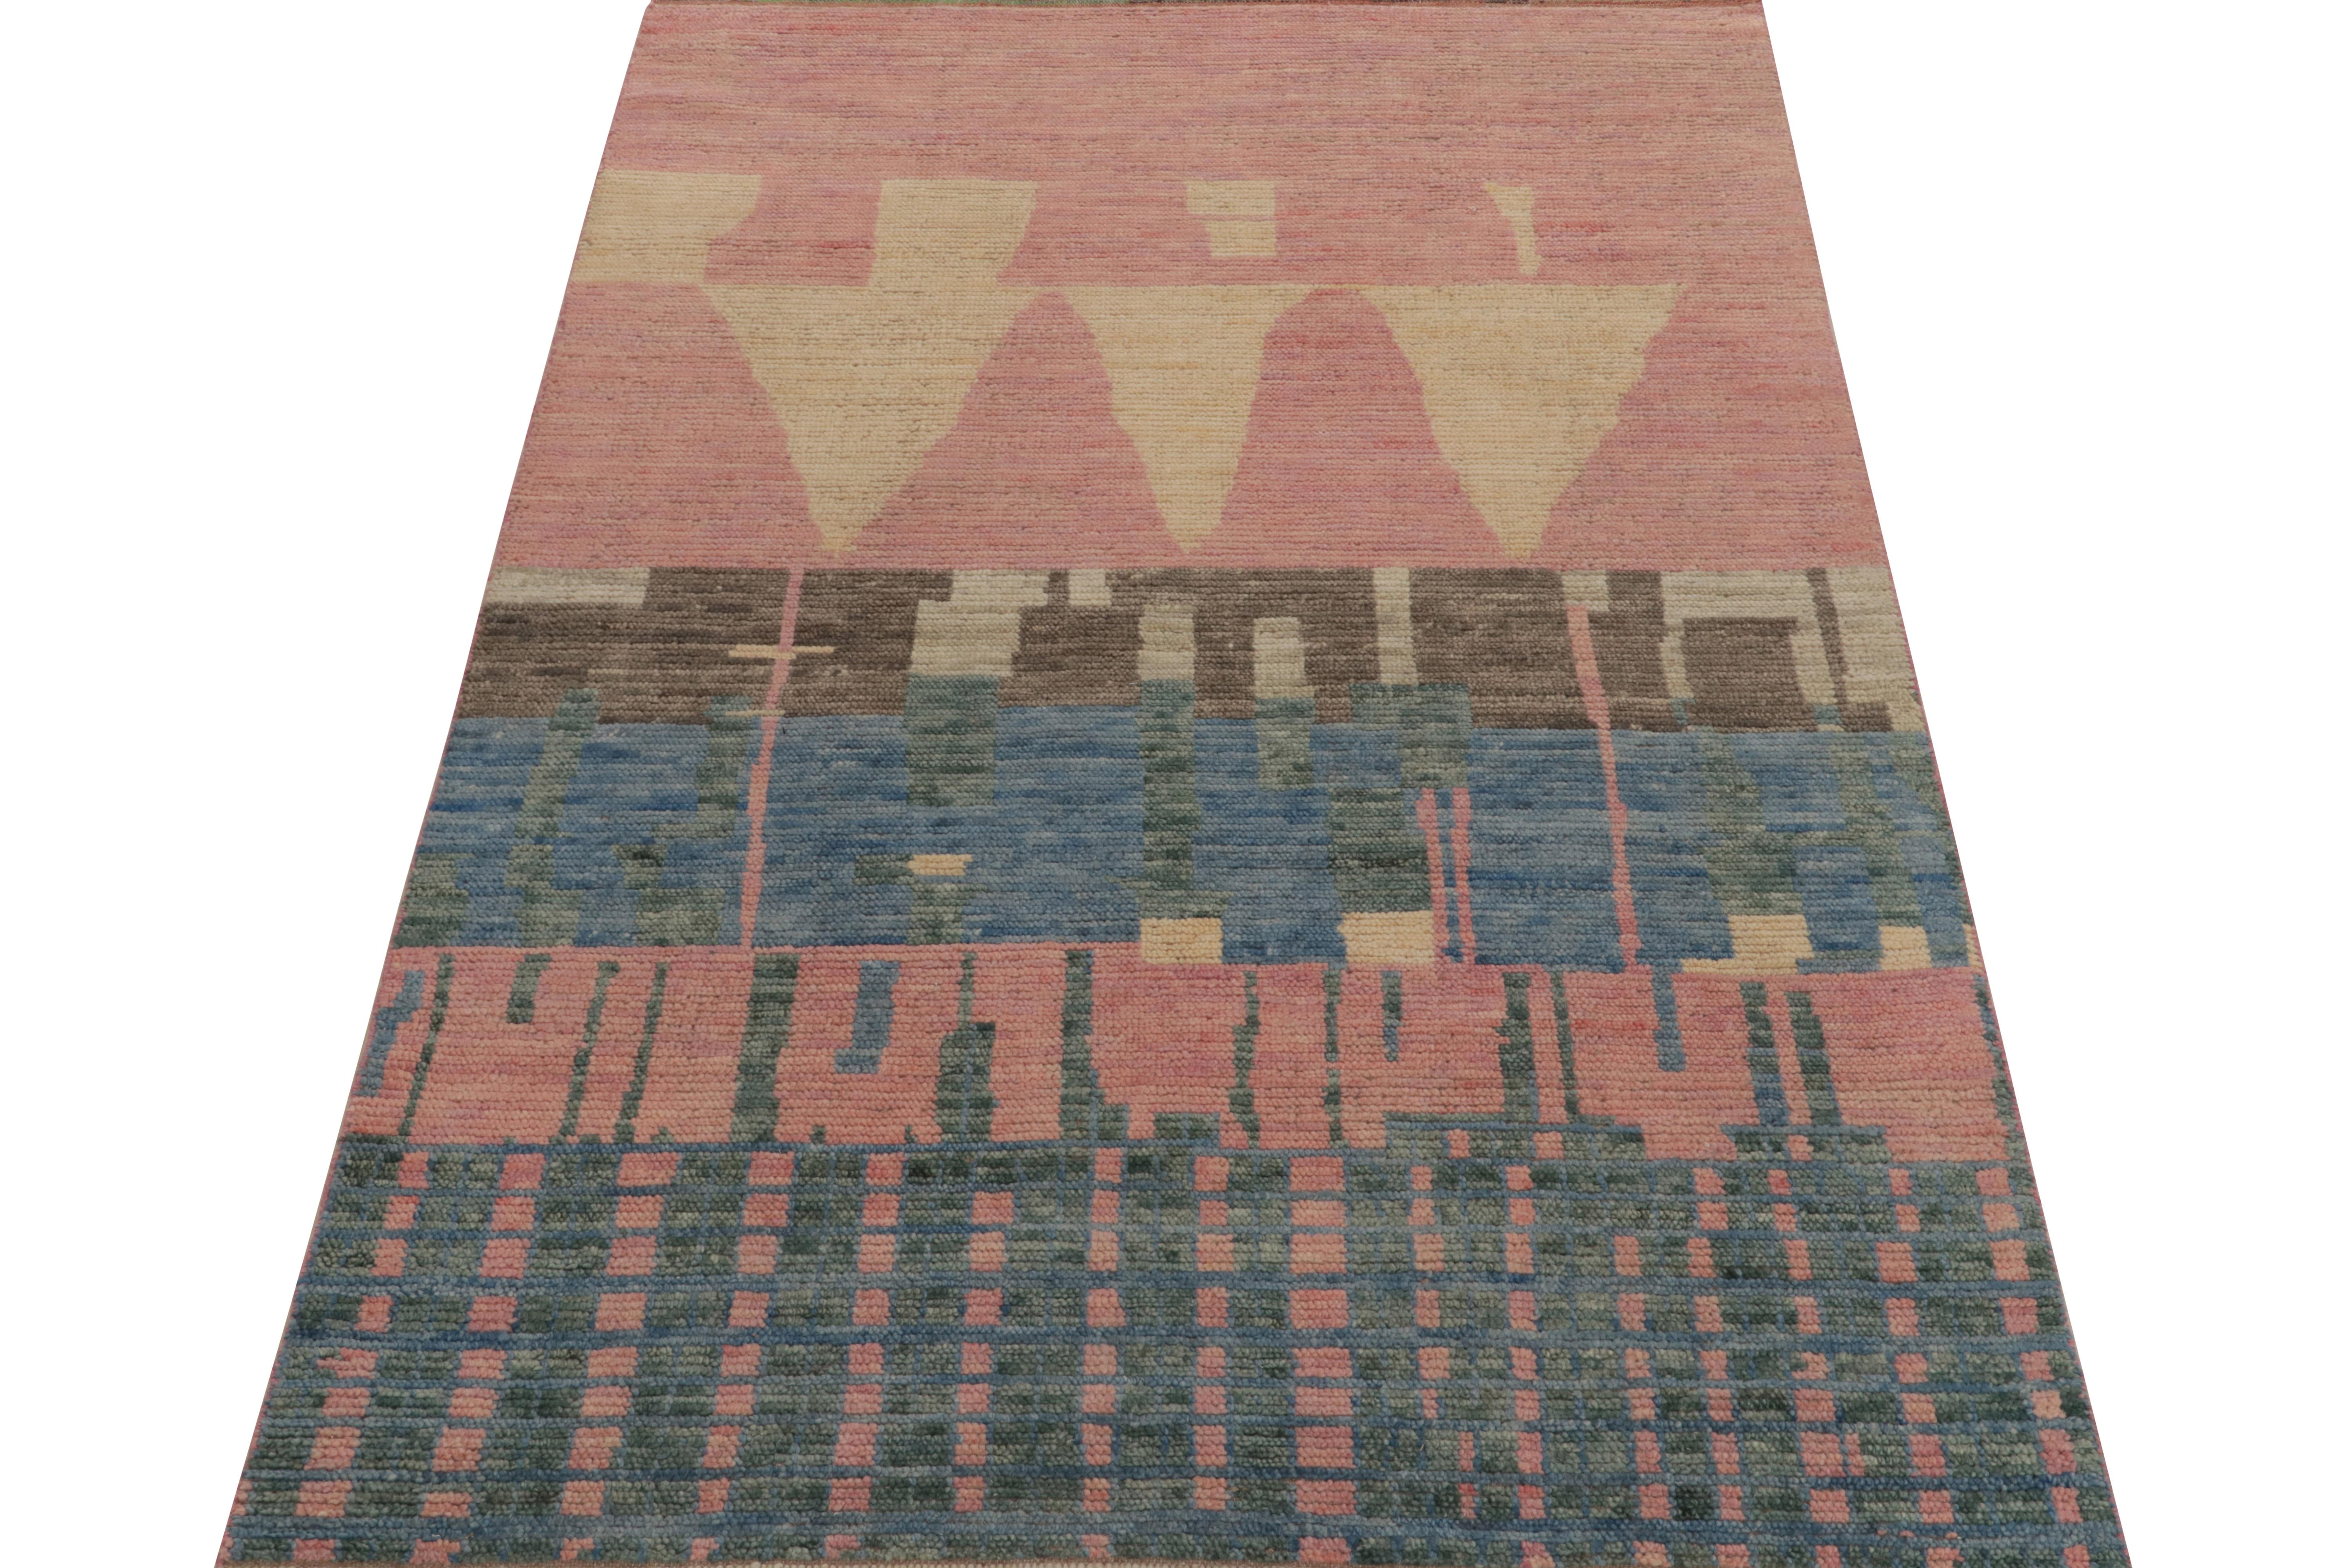 Tribal Rug & Kilim’s Moroccan Style Rug in Pink, Blue & Beige-Brown Geometric Patterns For Sale